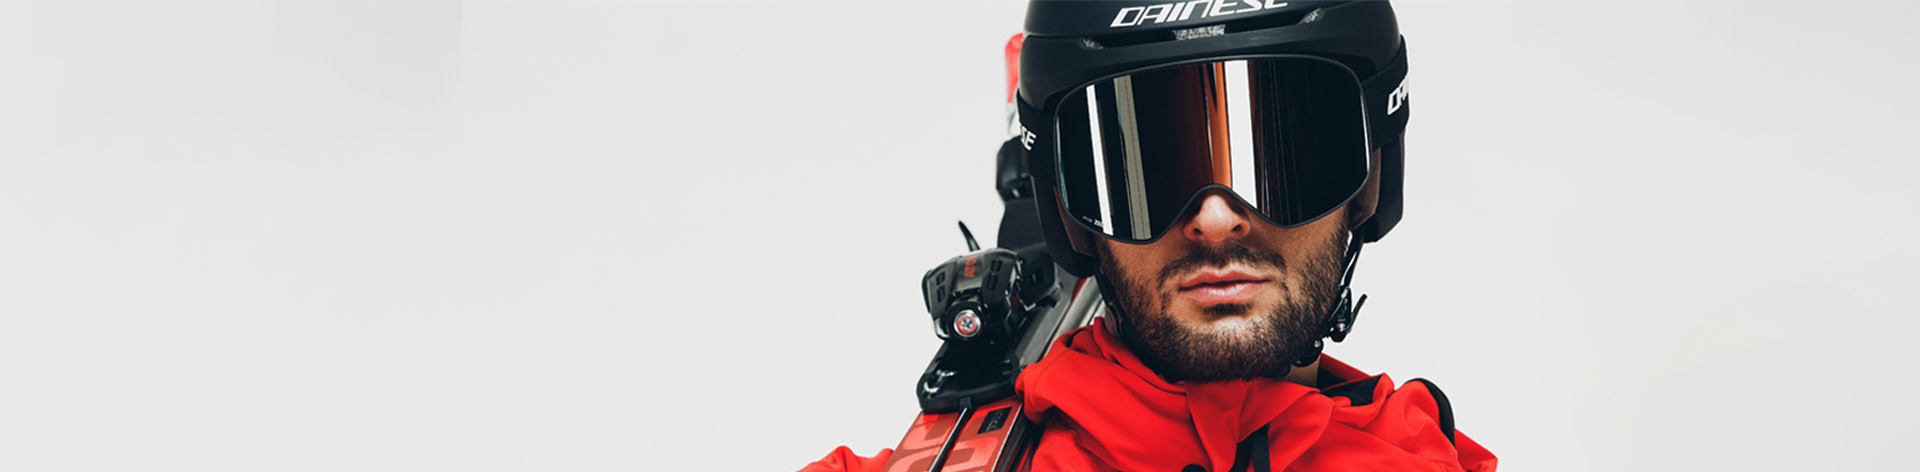 Dainese Winter Sports New arrivals